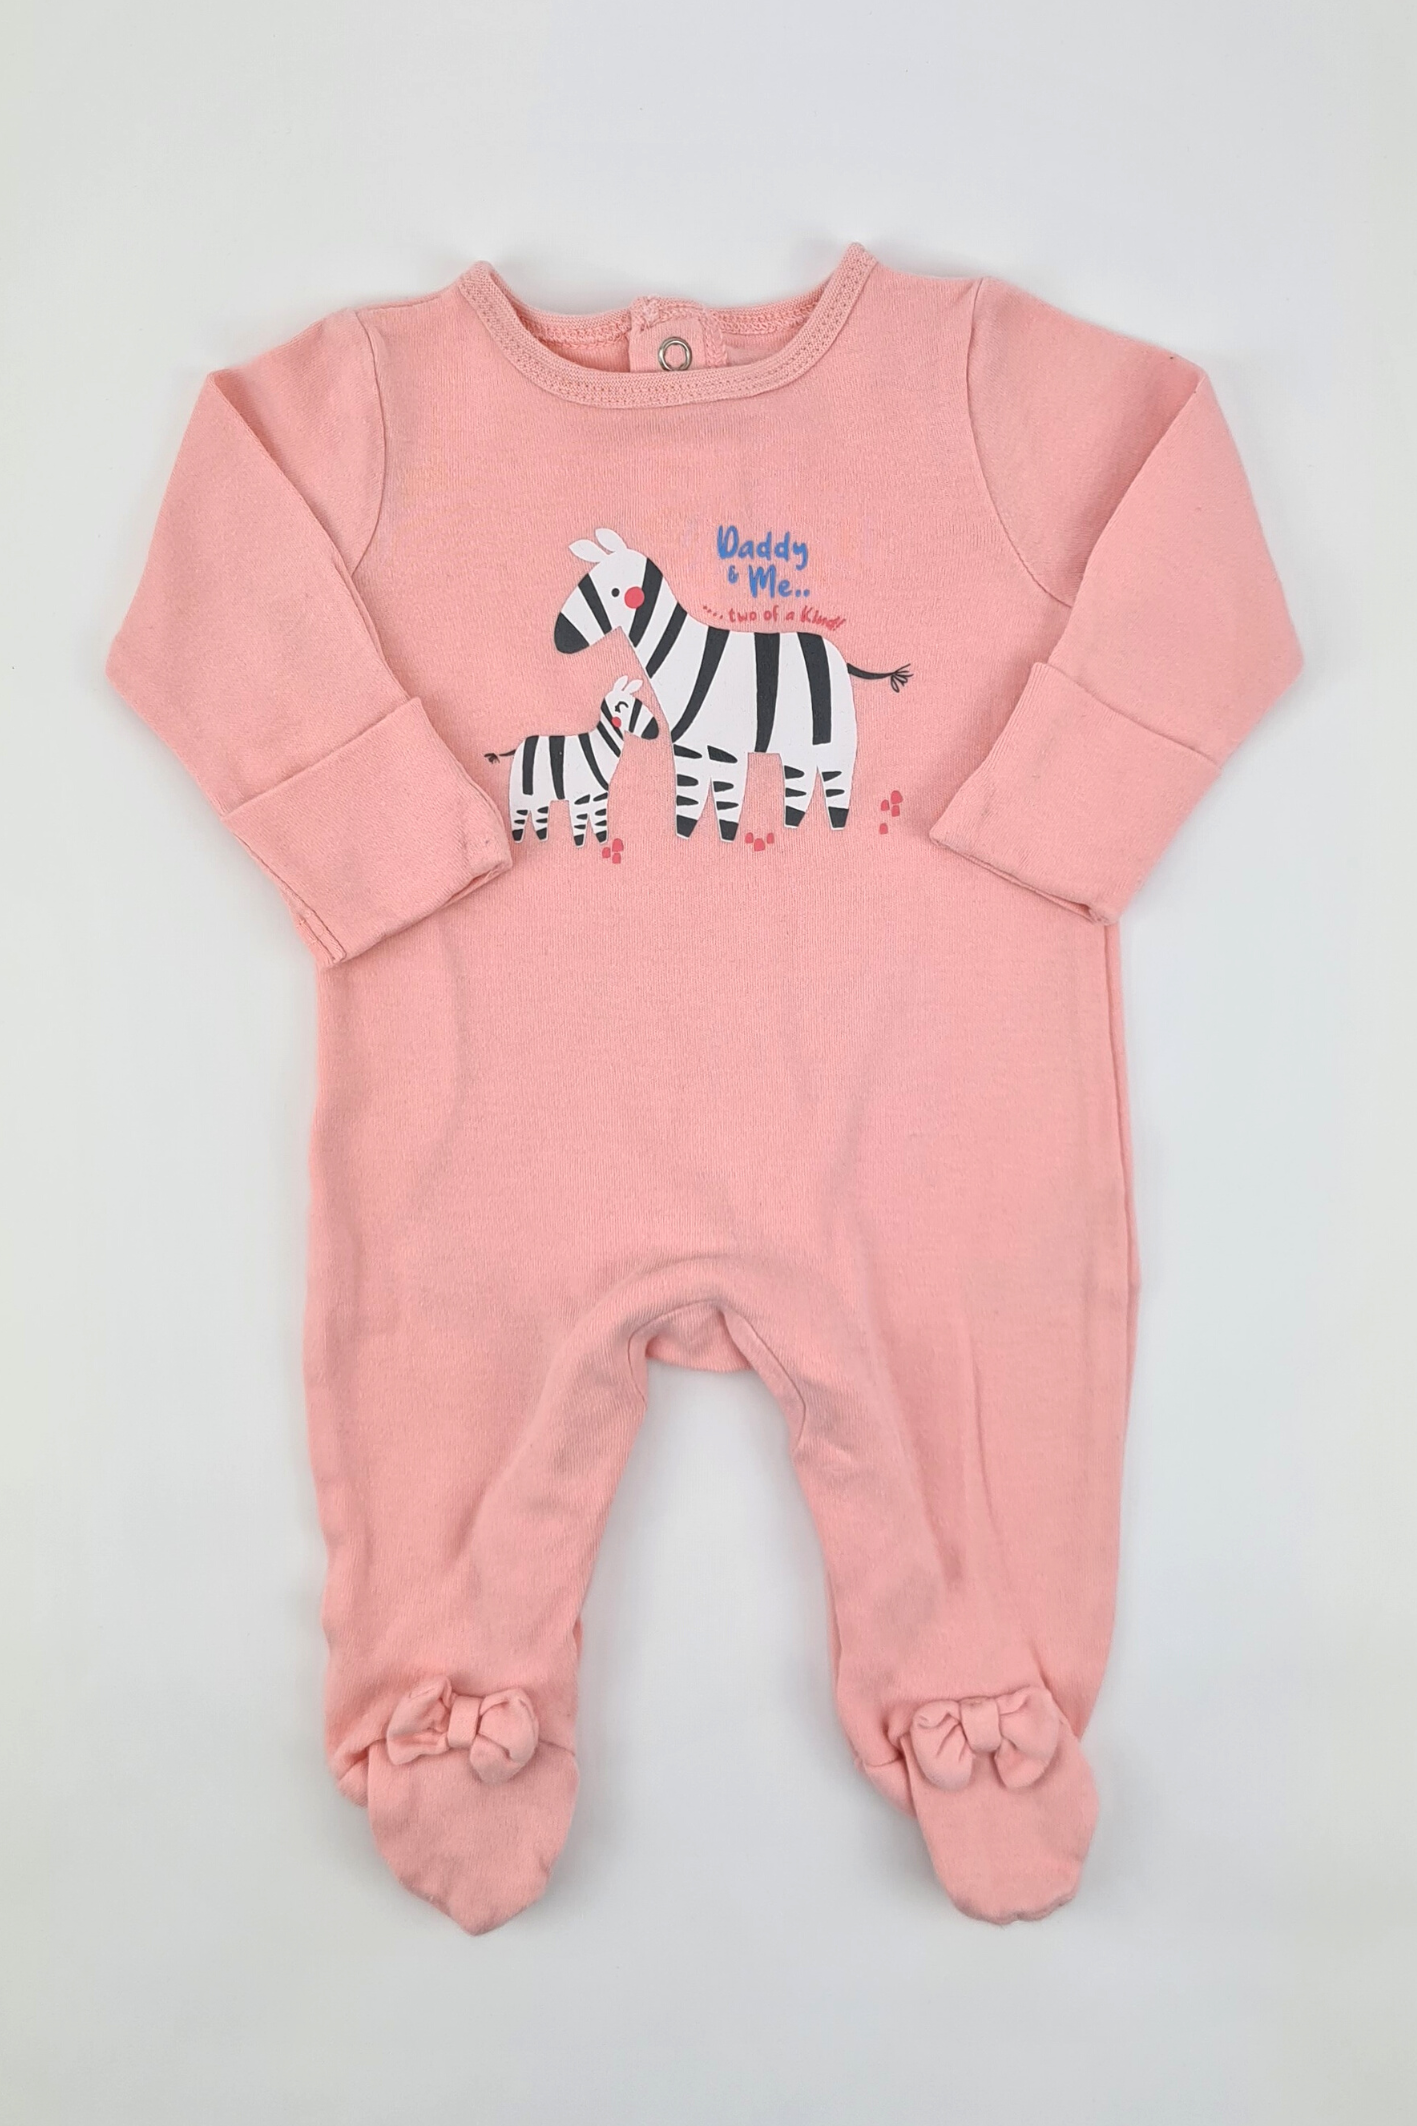 Newborn (10lbs) - 100% Cotton 'Daddy & Me.. . Two Of A Kind!' Sleepsuit (M&Co)